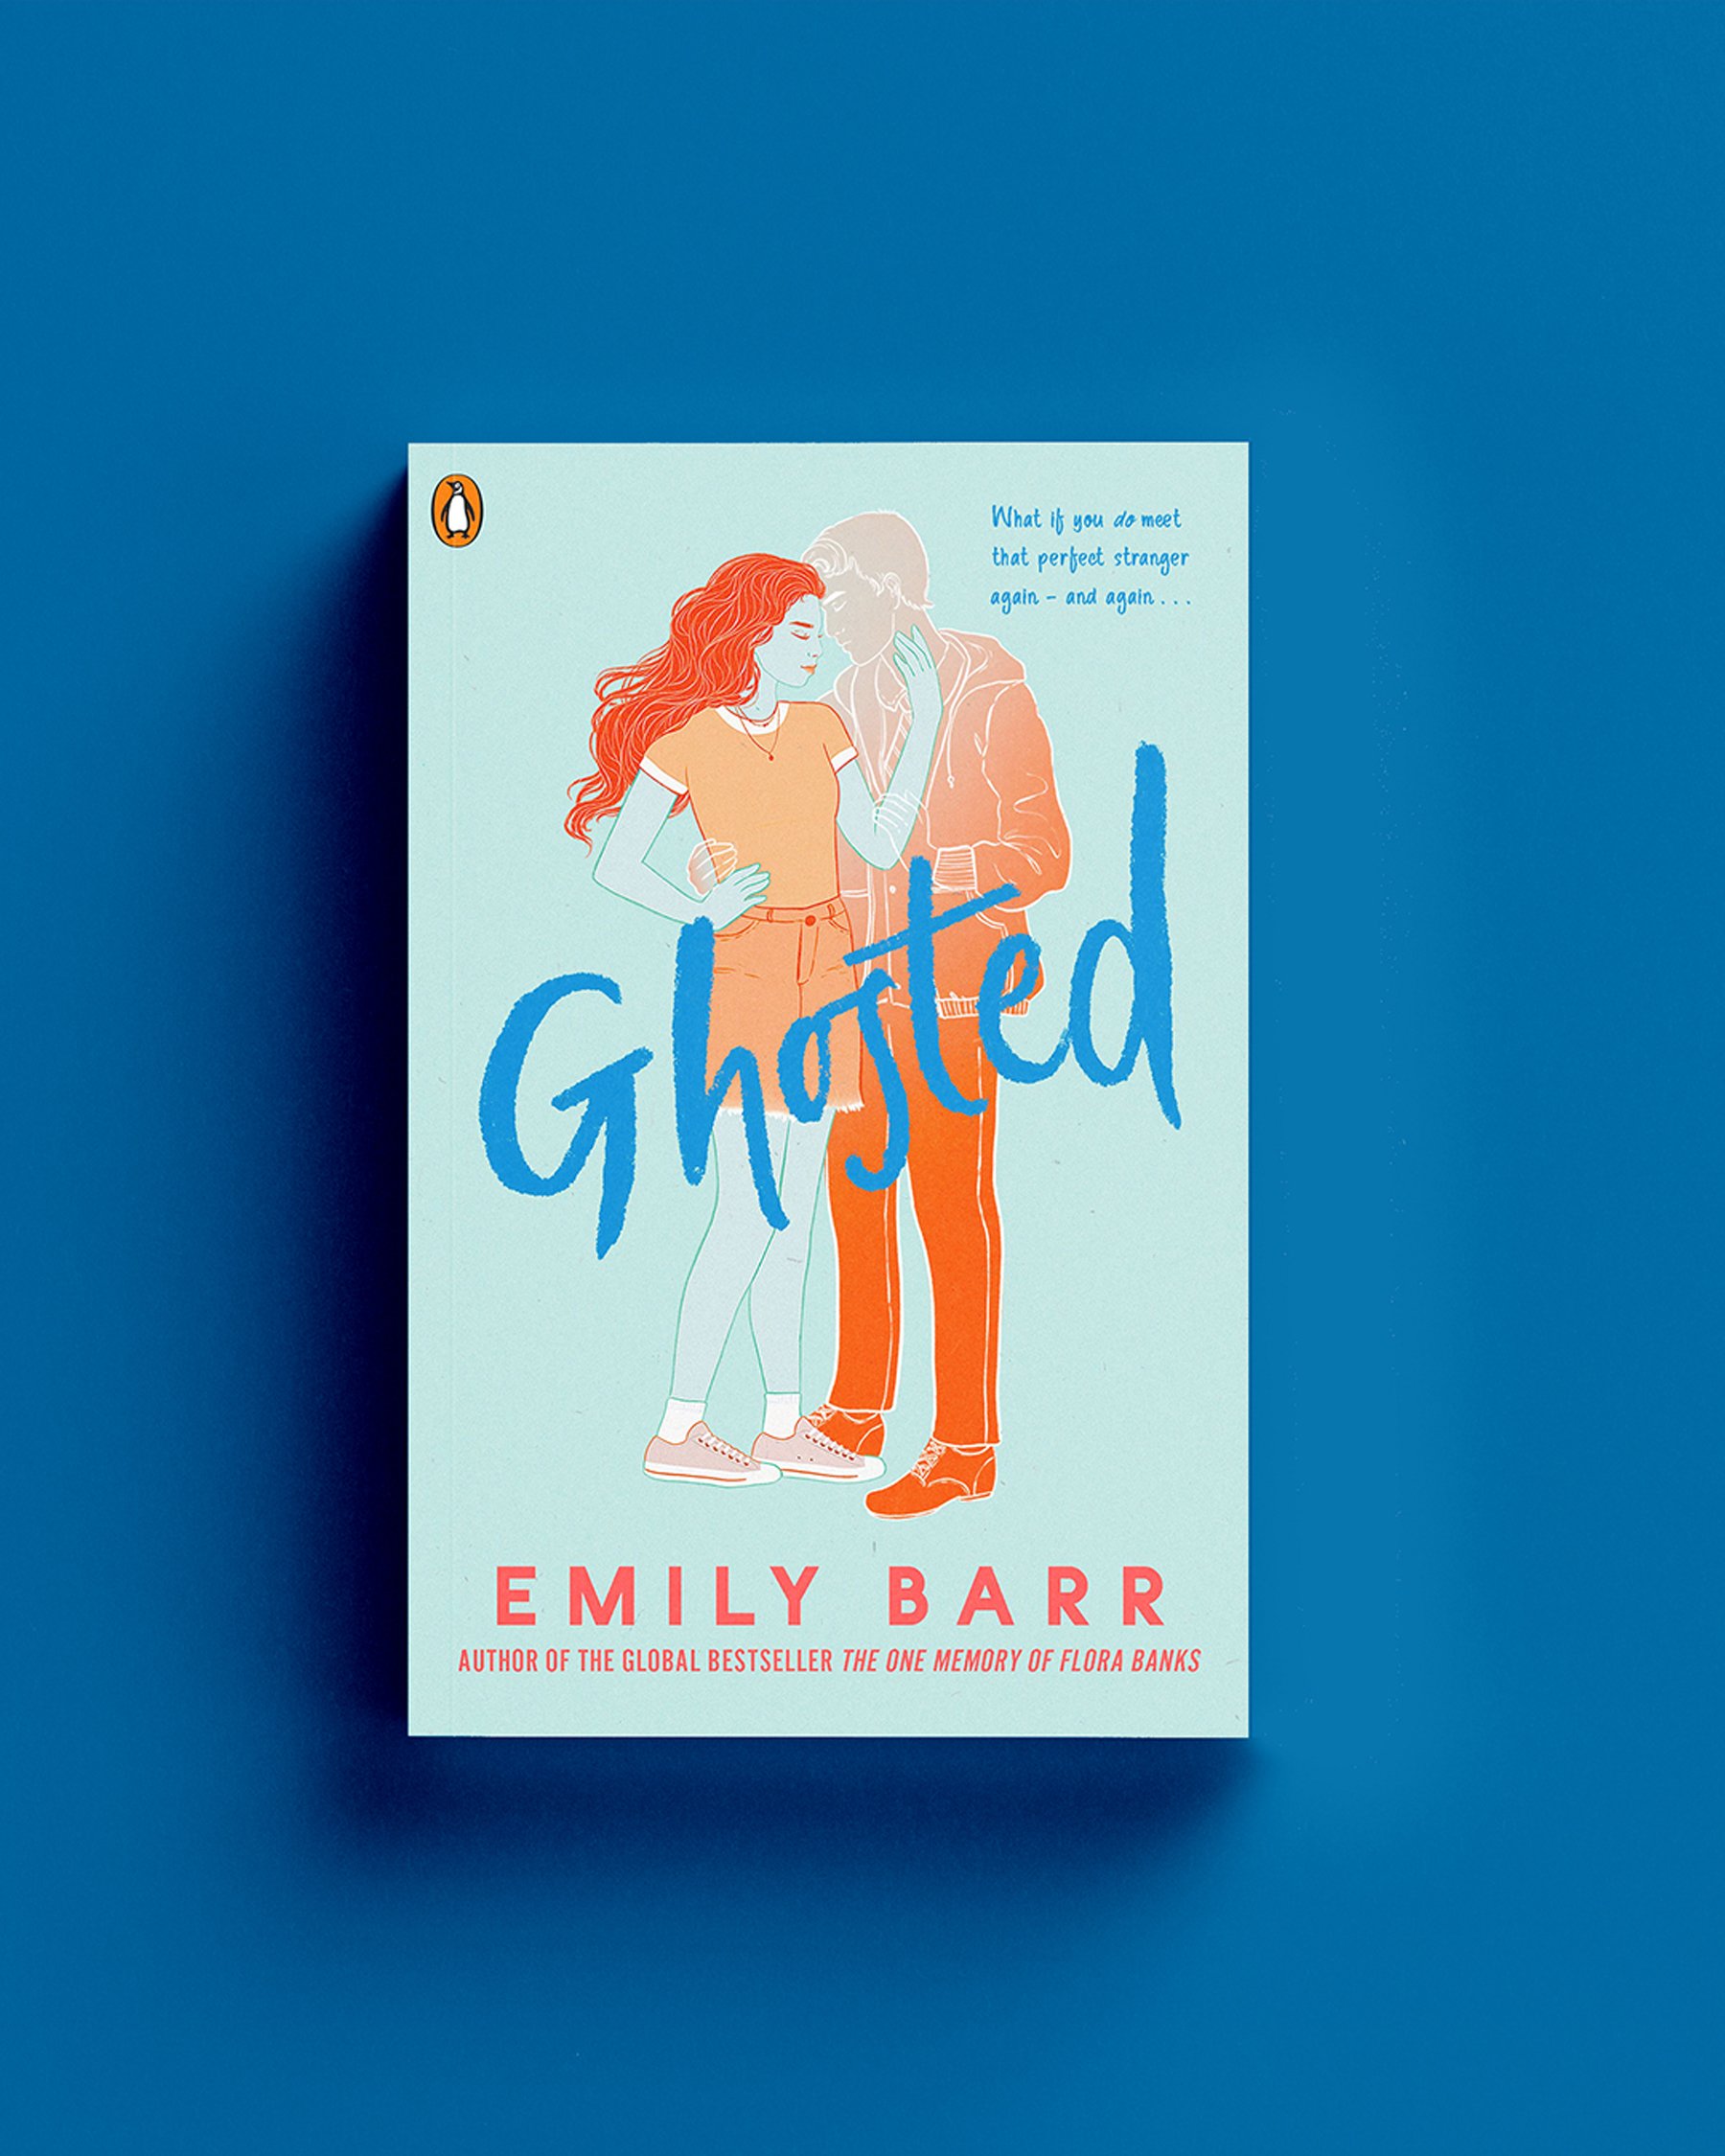 Cover for "Ghosted" by Emily Barr